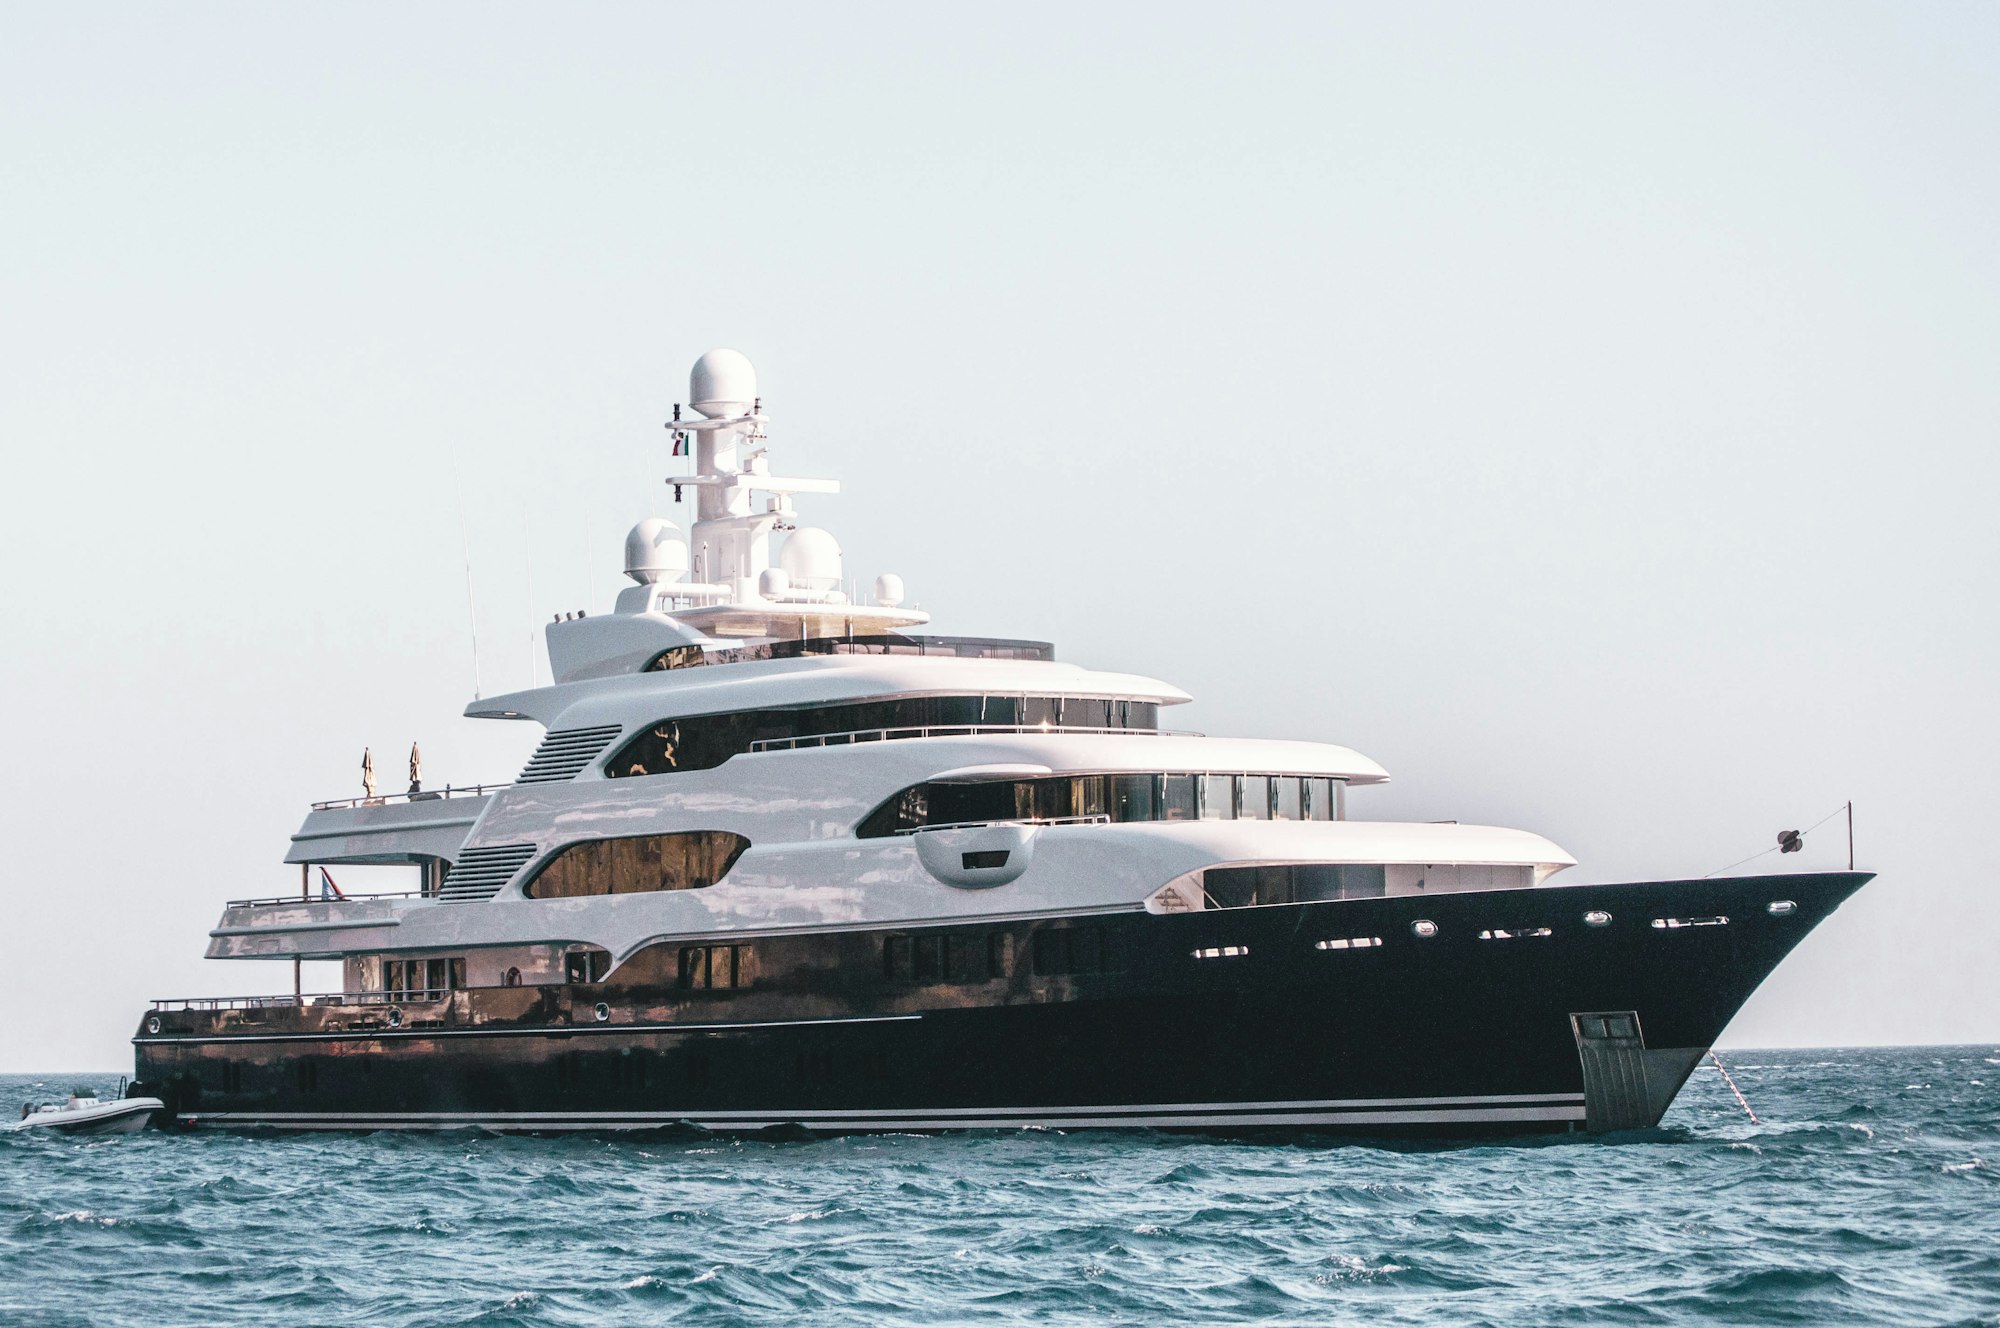 The Yachts Or Poverty Mindset